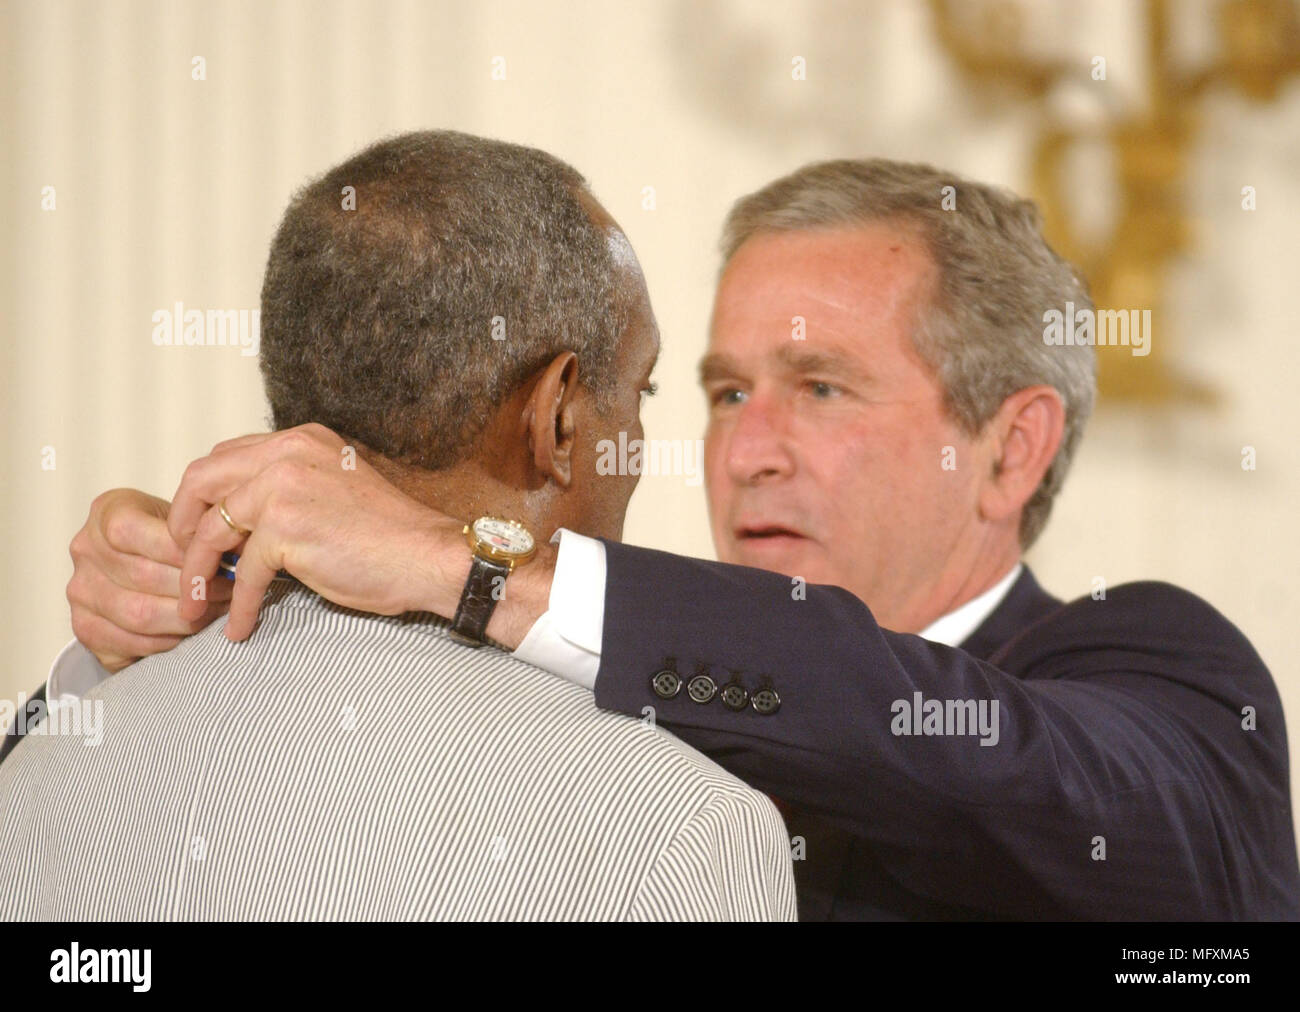 Washington, District of Columbia, USA. 9th July, 2002. Washington, DC - July 9, 2002 -- United States President George W. Bush honors Bill Cosby with the Presidential Medal of Freedom during a ceremony in the East Room of the White House in Washington, DC on July 9, 2002.Credit: Ron Sachs/CNP Credit: Ron Sachs/CNP/ZUMA Wire/Alamy Live News Stock Photo